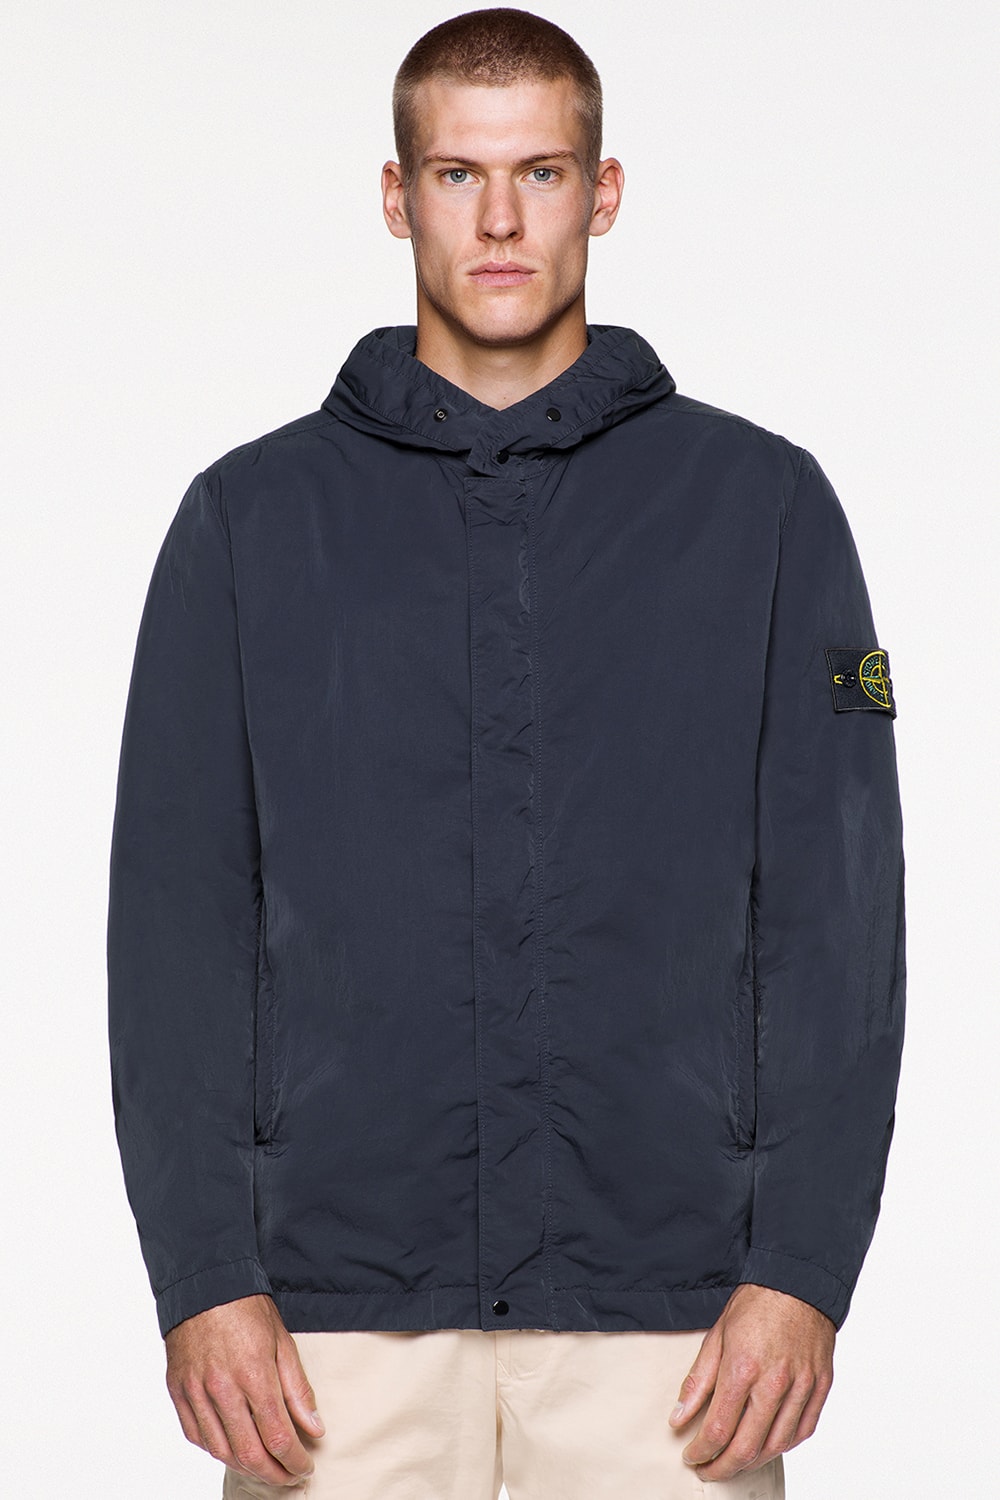 stone island spring summer 2021 icon imagery outerwear italian details moncler buy cop purchase